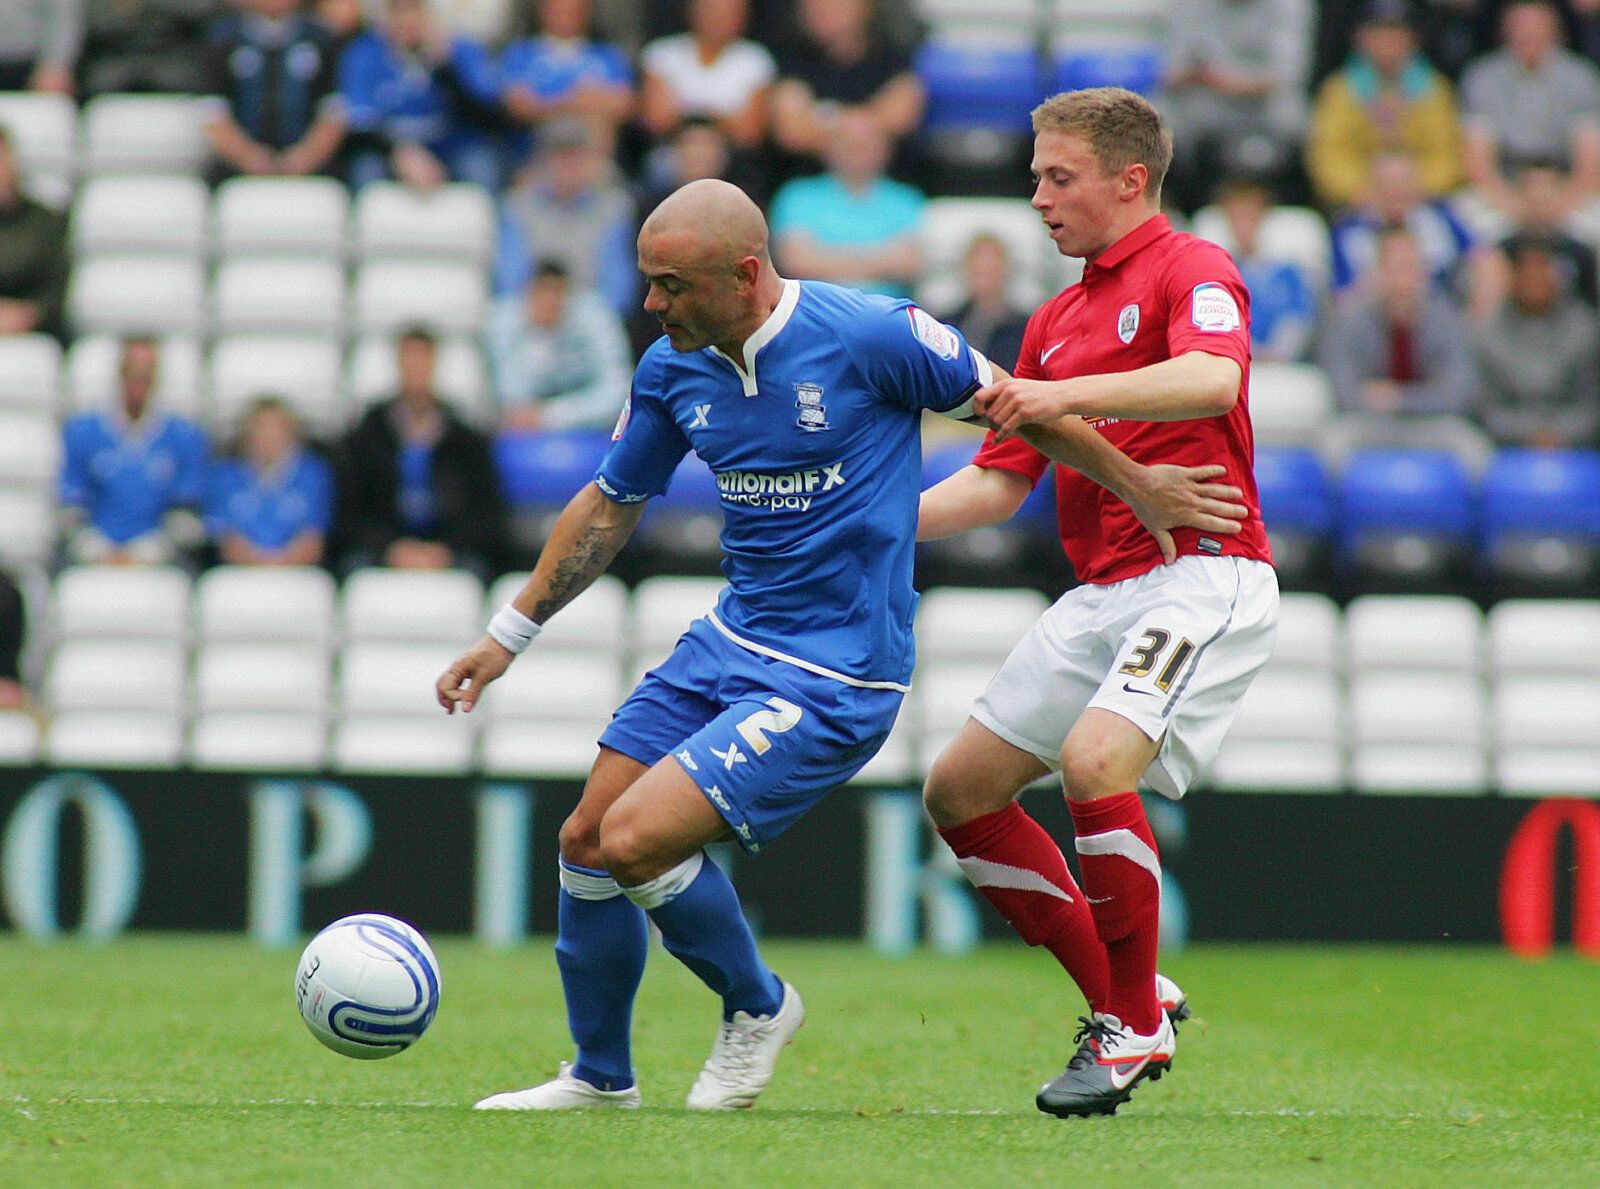 Football - Birmingham City v Barnsley npower Football League Championship  - St Andrews - 24/9/11 
Birmingham's Stephen Carr (L) and Barnsley's Jordan Clark in action 
Mandatory Credit: Action Images / David Field 
Livepic 
EDITORIAL USE ONLY. No use with unauthorized audio, video, data, fixture lists, club/league logos or live services. Online in-match use limited to 45 images, no video emulation. No use in betting, games or single club/league/player publications.  Please contact your account m